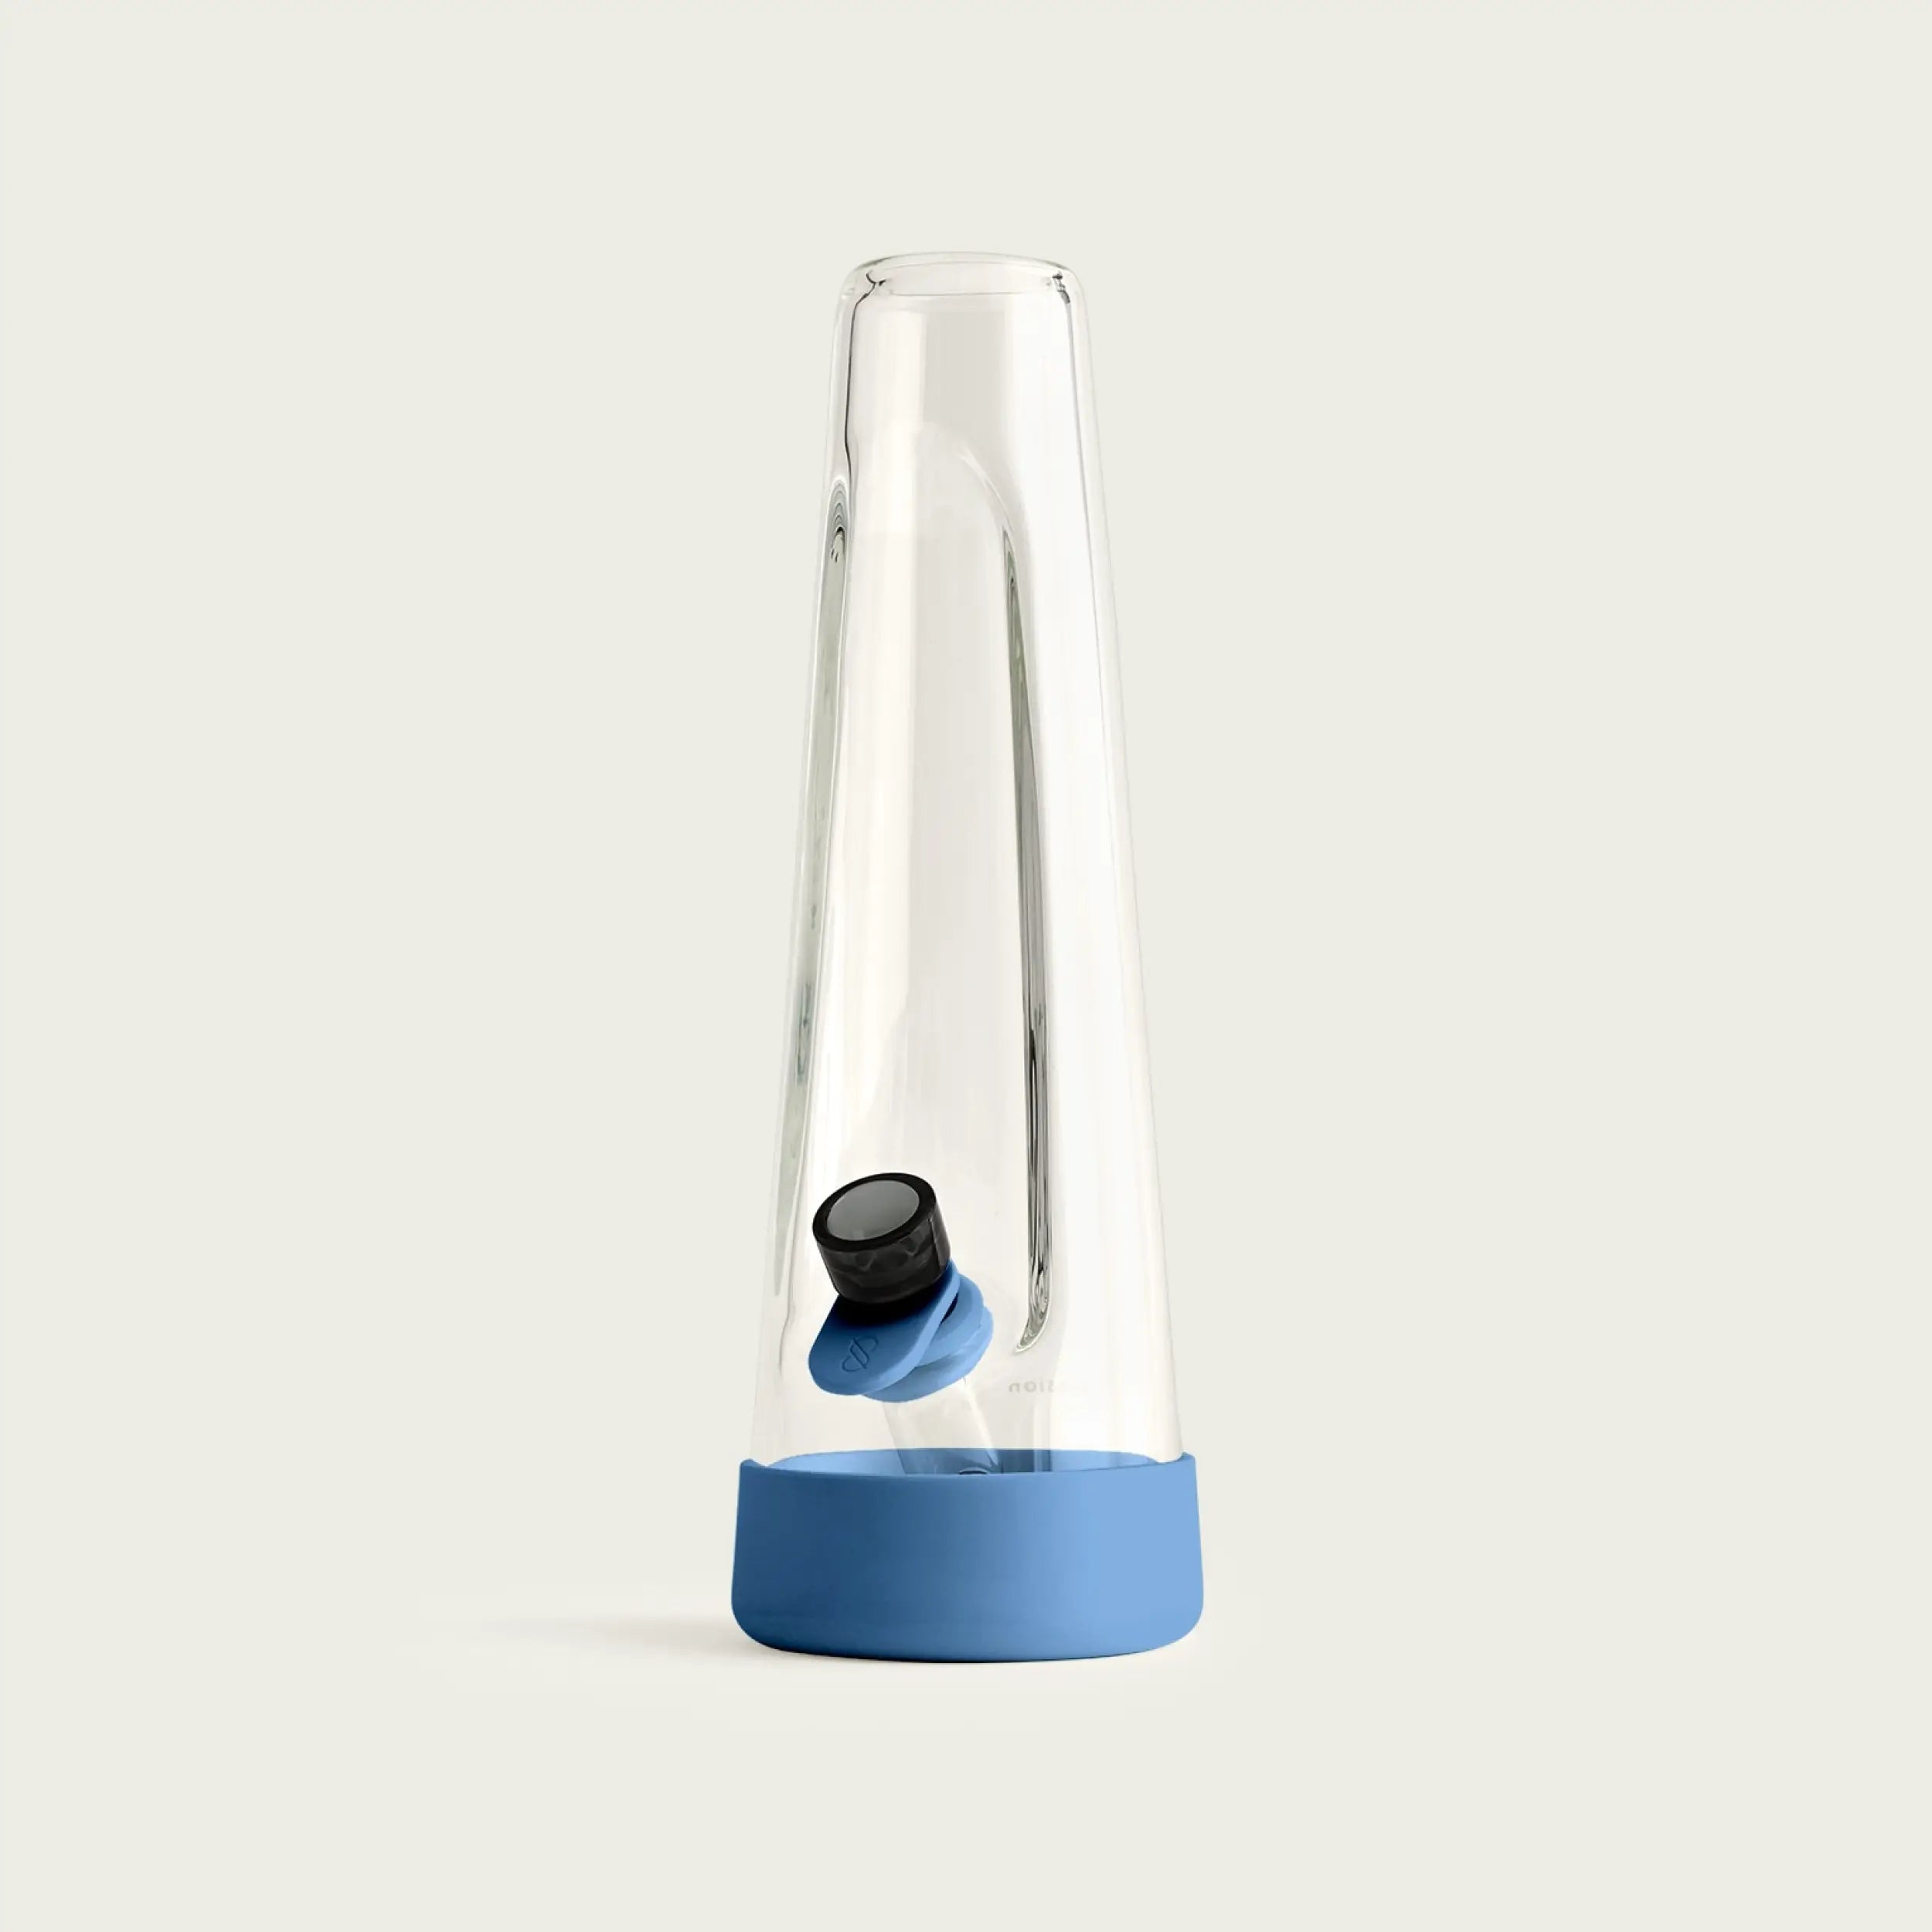 Experience Elegance with Session's Indigo Blue Bong.